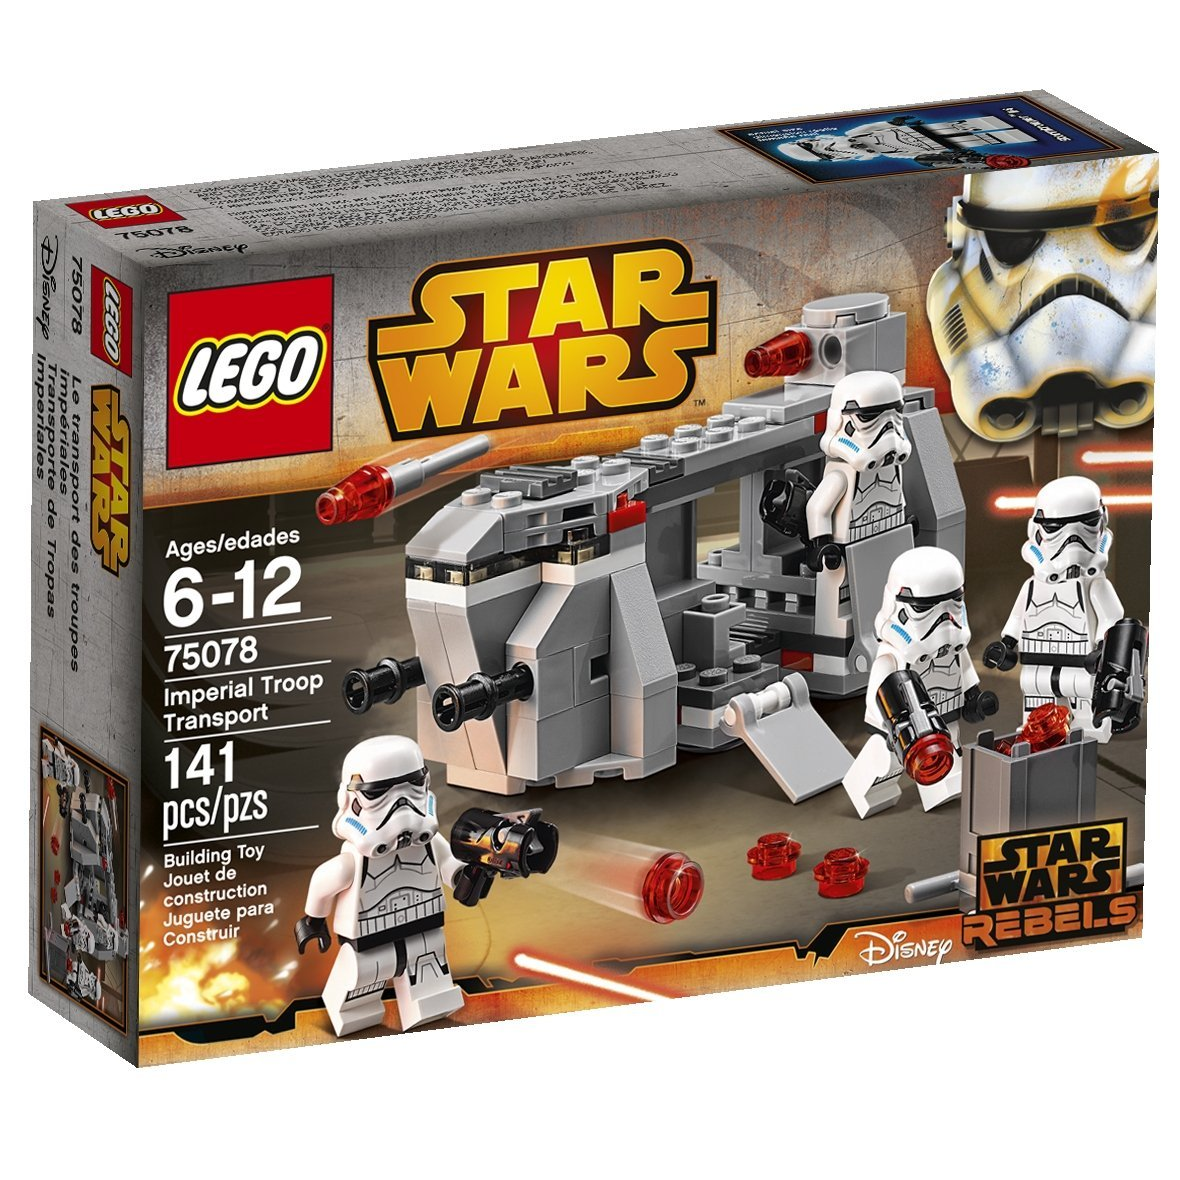 LEGO Star Wars Imperial Troop Transport 75078 Only $10.25 on Amazon!